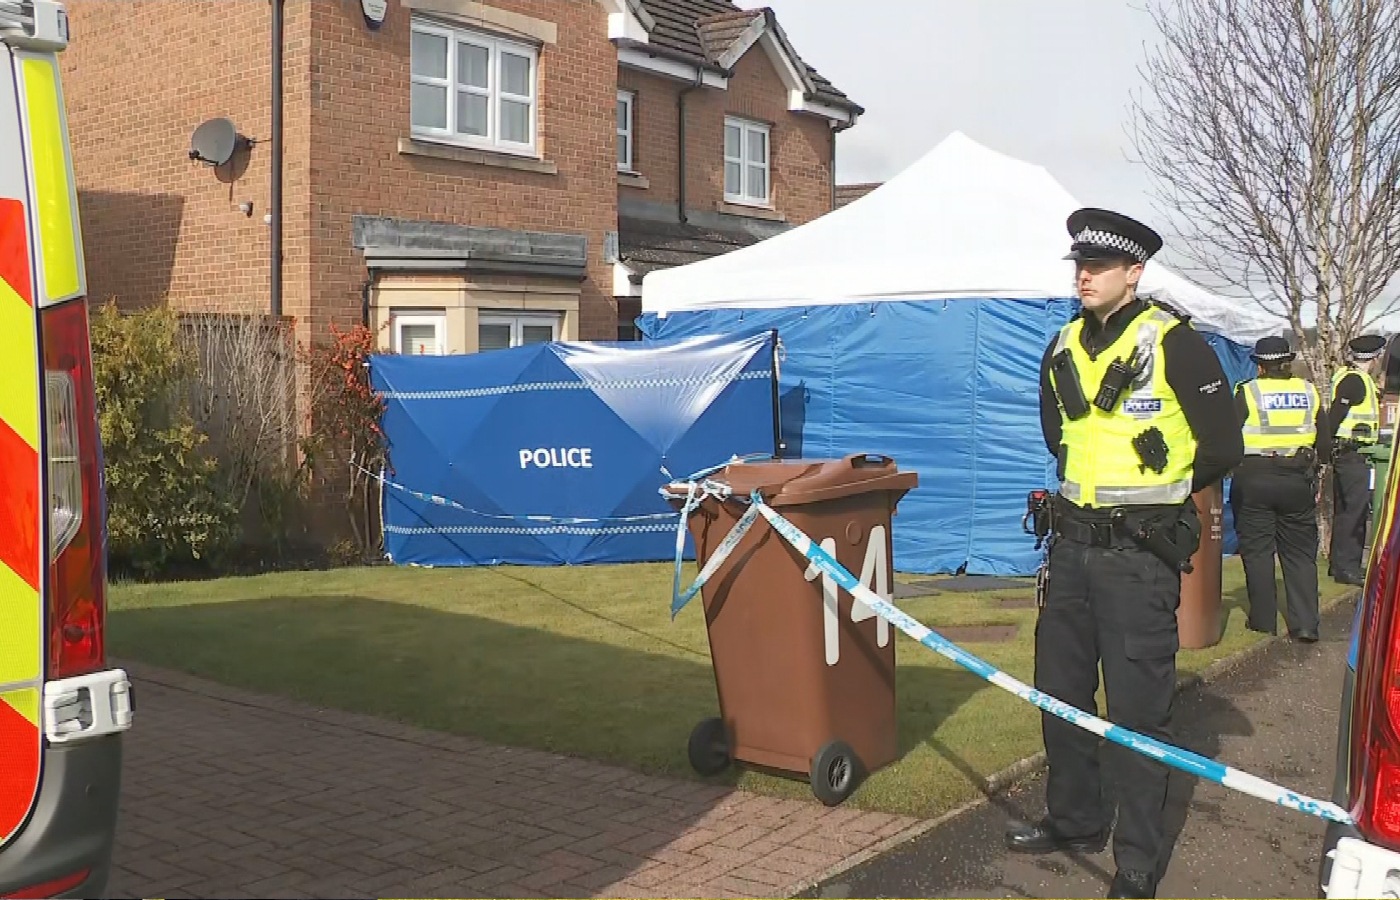 Police had set up screens and a large tent outside Nicola Sturgeon and Peter Murrell's home.